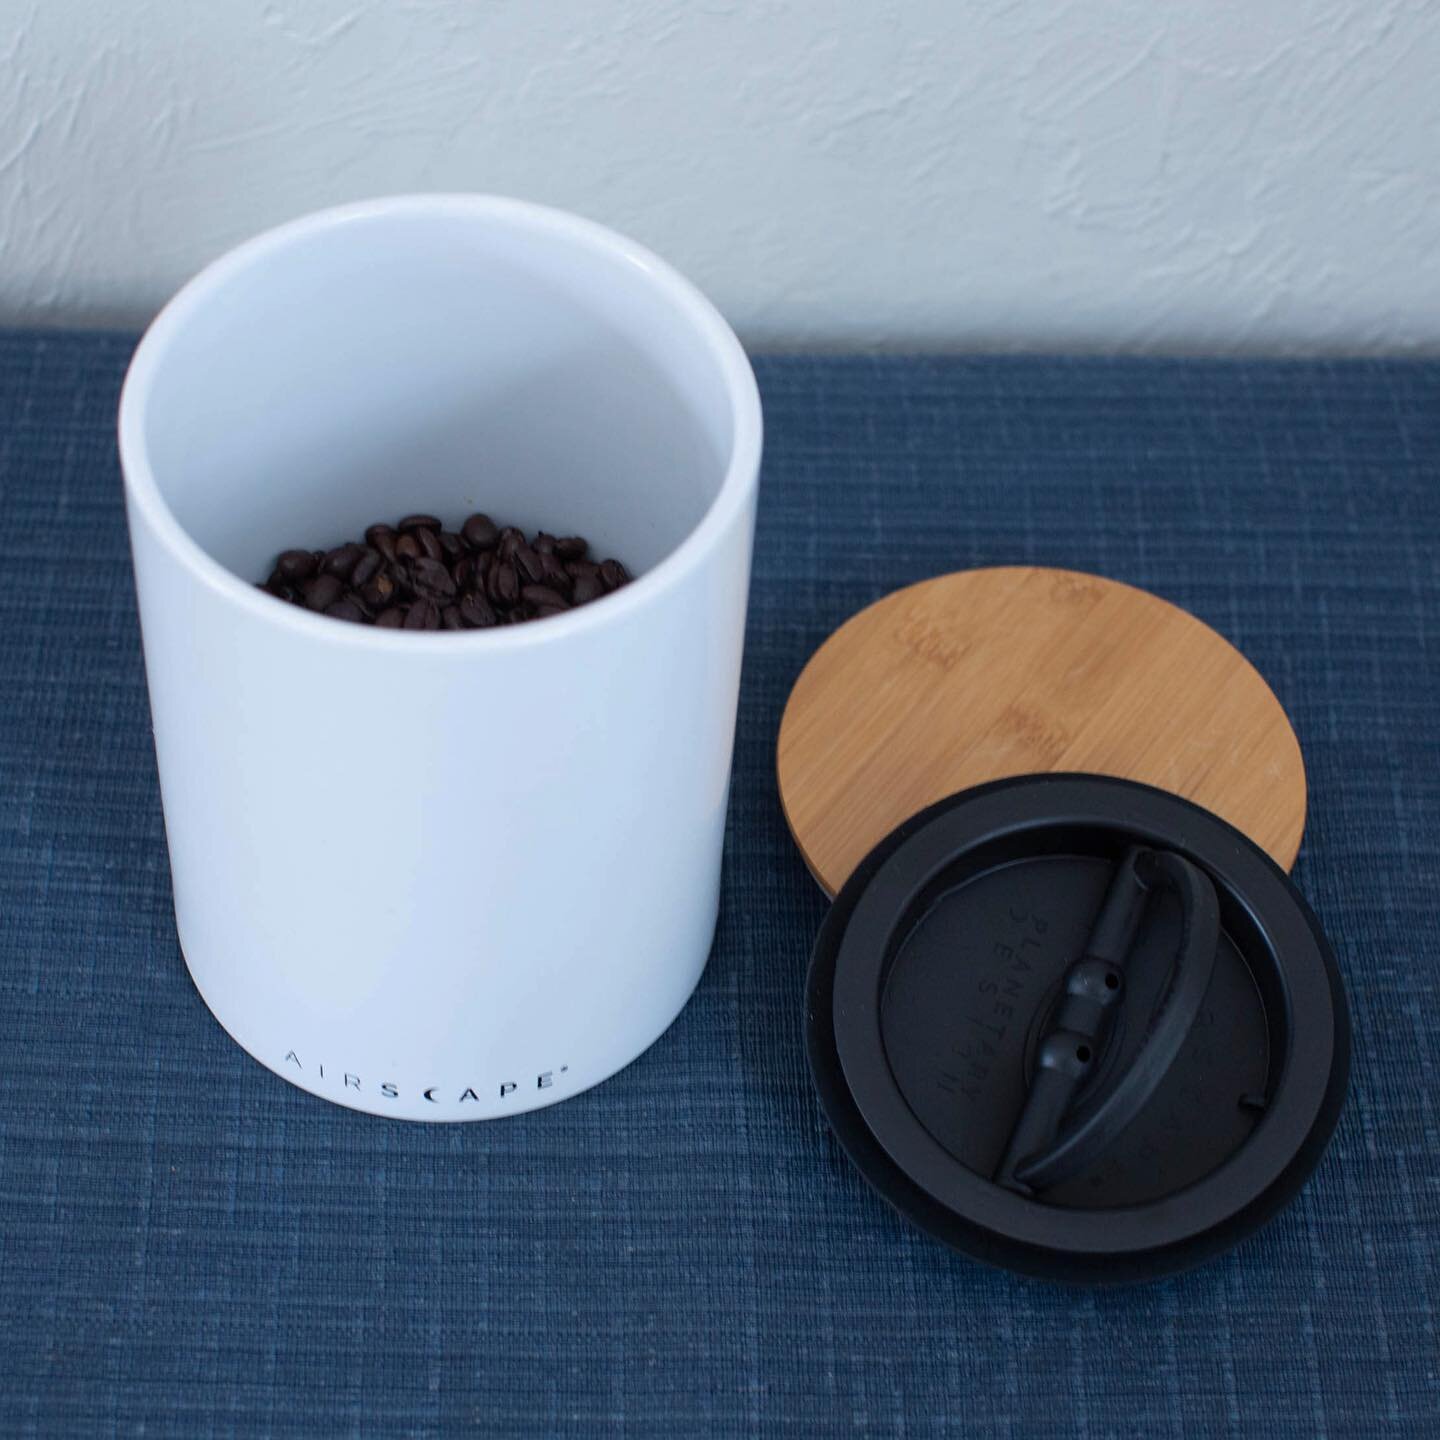 New Product Alert! We&rsquo;ve got Airscape Ceramic Canisters from Montana&rsquo;s @planetarydesign your beans and taste buds will thank you. #airscapecanisters #risedriggs #coffeestorage #coffeecanister #tetonvalley #driggsidaho